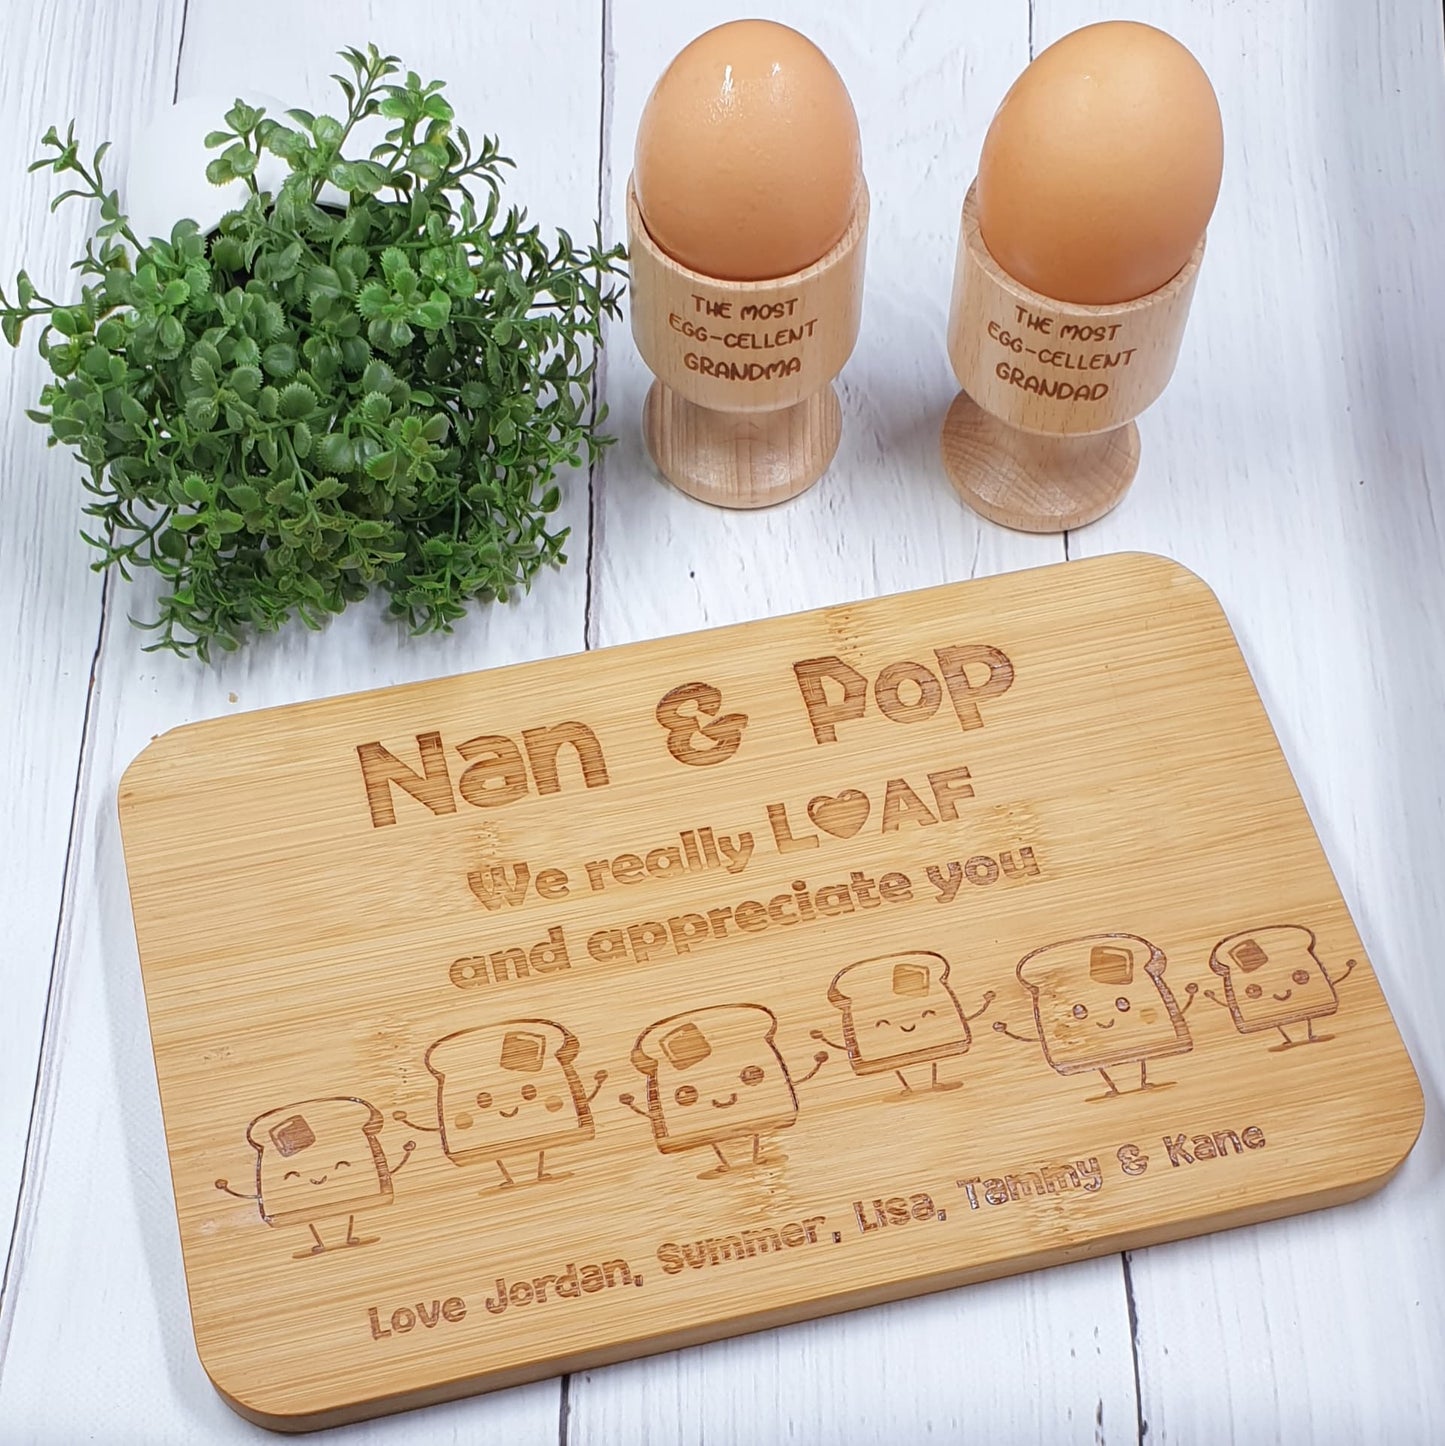 MASSIVE 15% OFF - Dippy Egg Board and cups